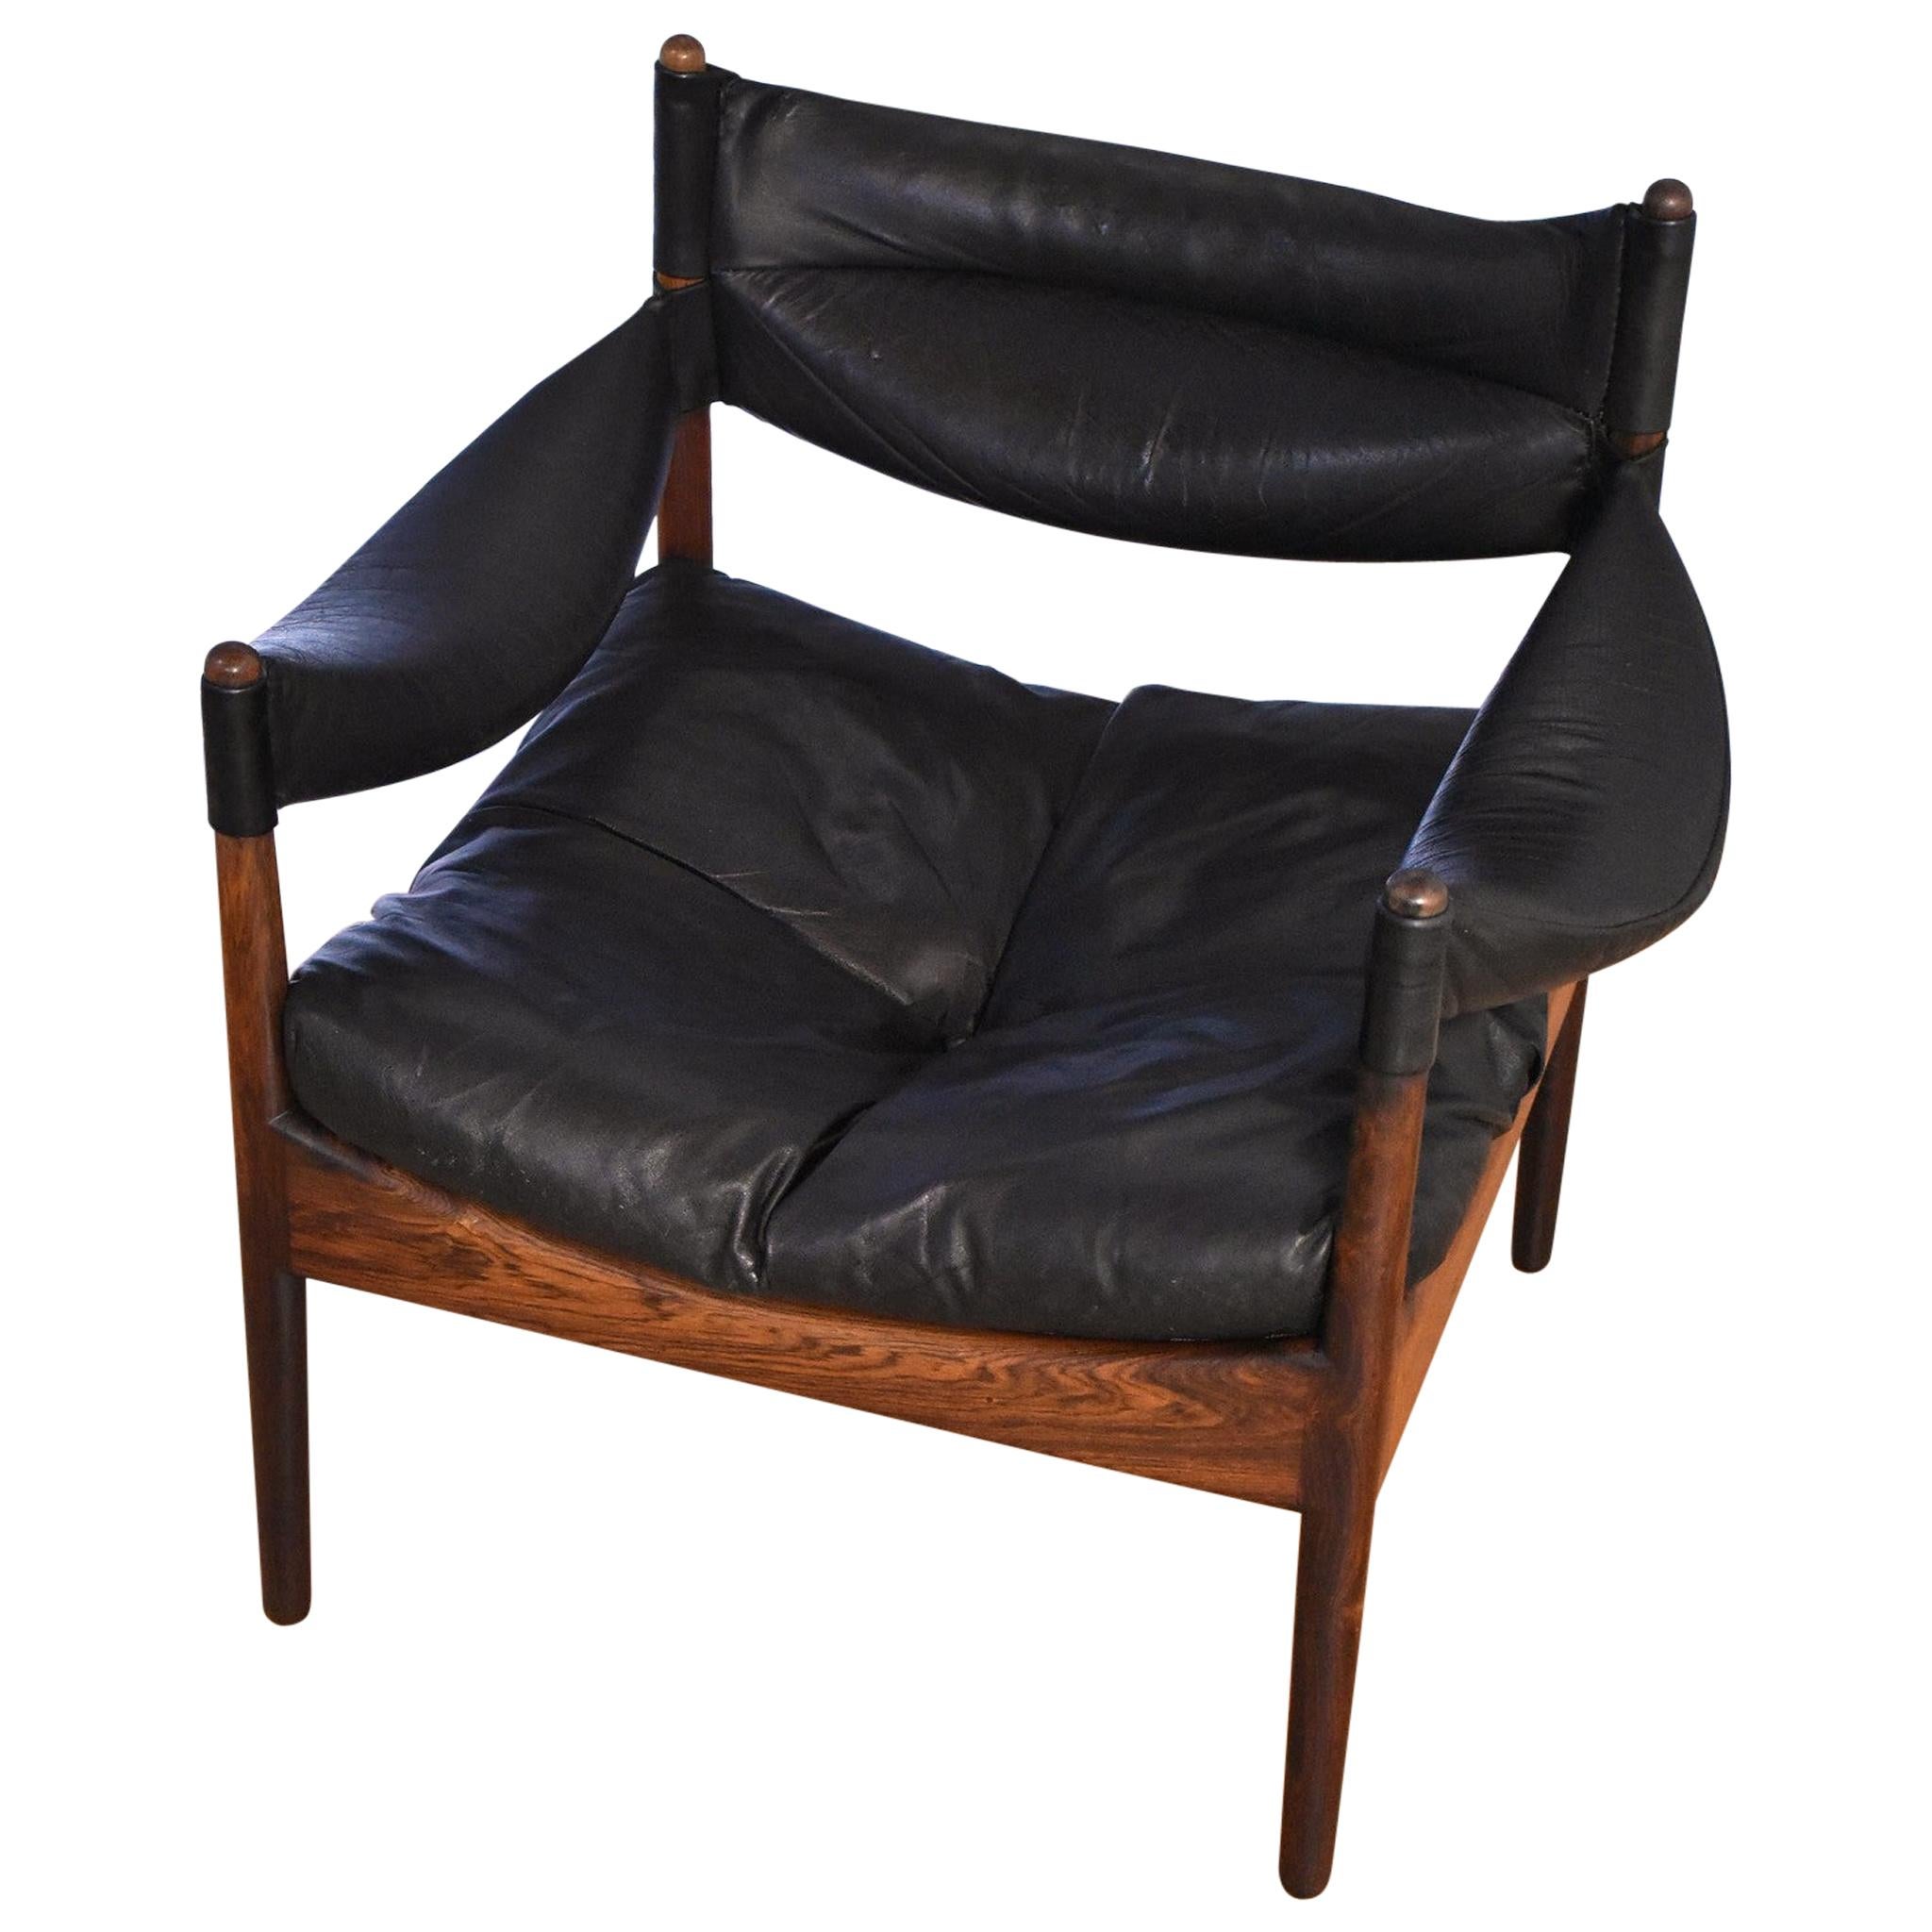 Rosewood and Leather 'Modus' Lounge Chair by Kristian Vedel for Søren Willadsen